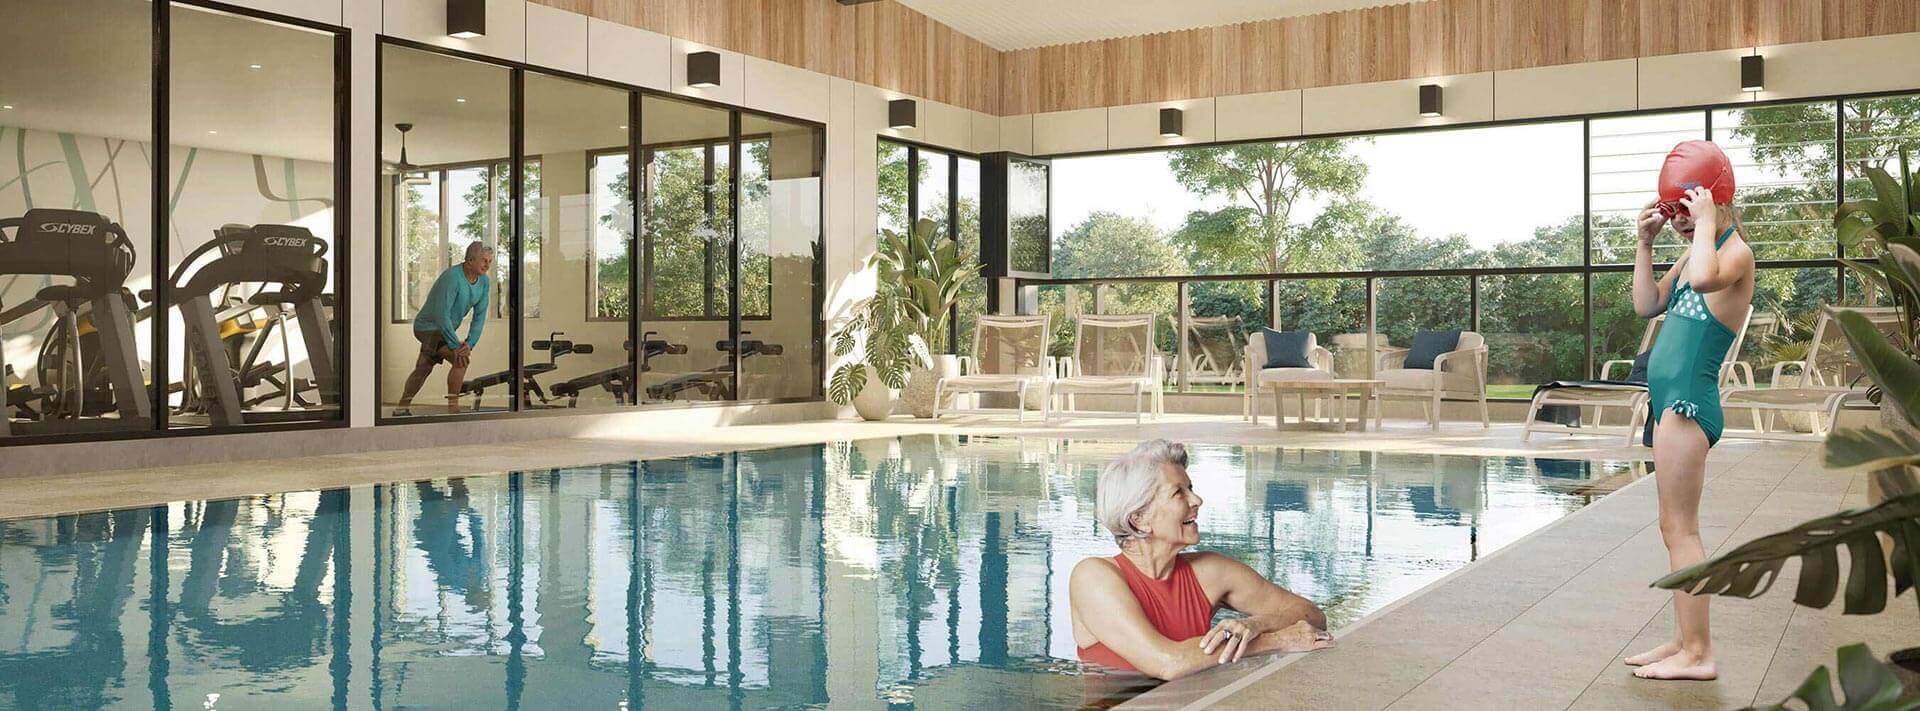 Enjoy a dip in the pool at the Blueheath Clubhouse in Medowie Port Stephens Newcastle